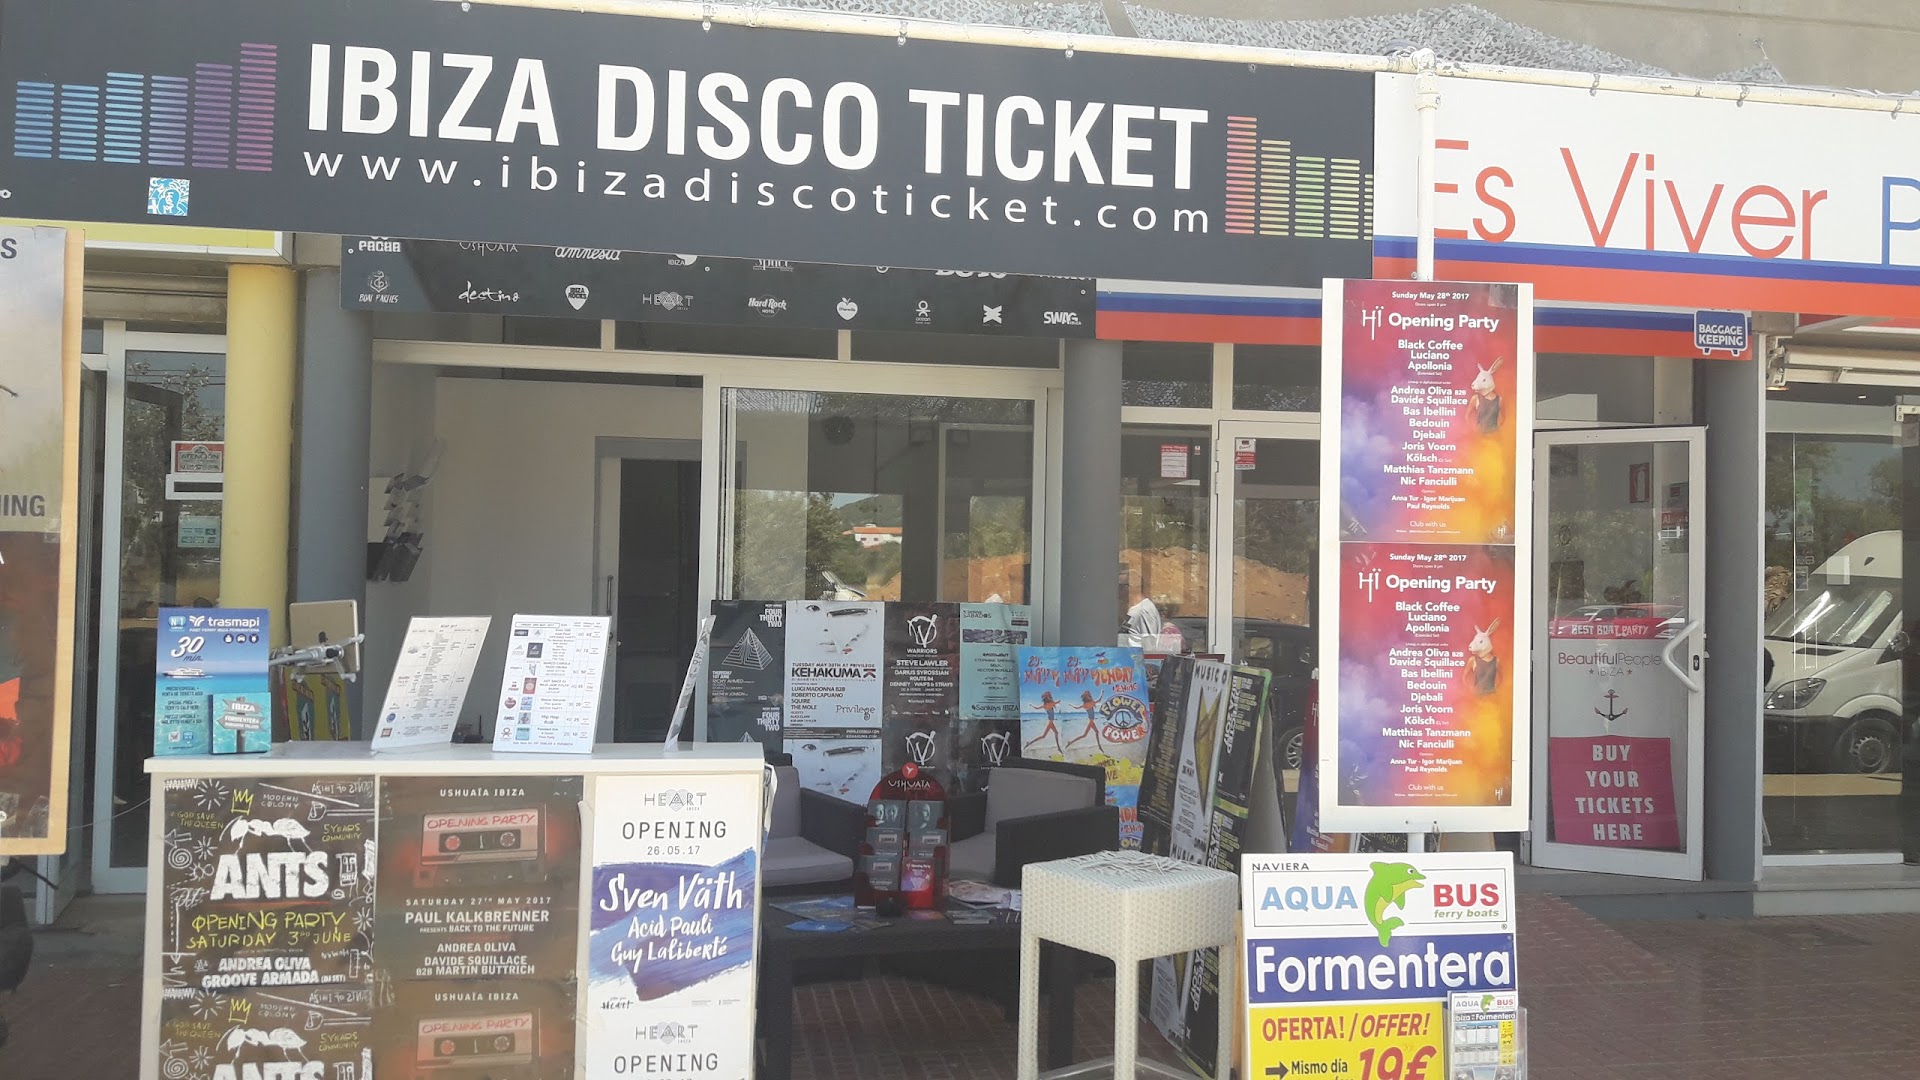 IBIZA DISCO TICKET - INCOMING ASSISTANCE